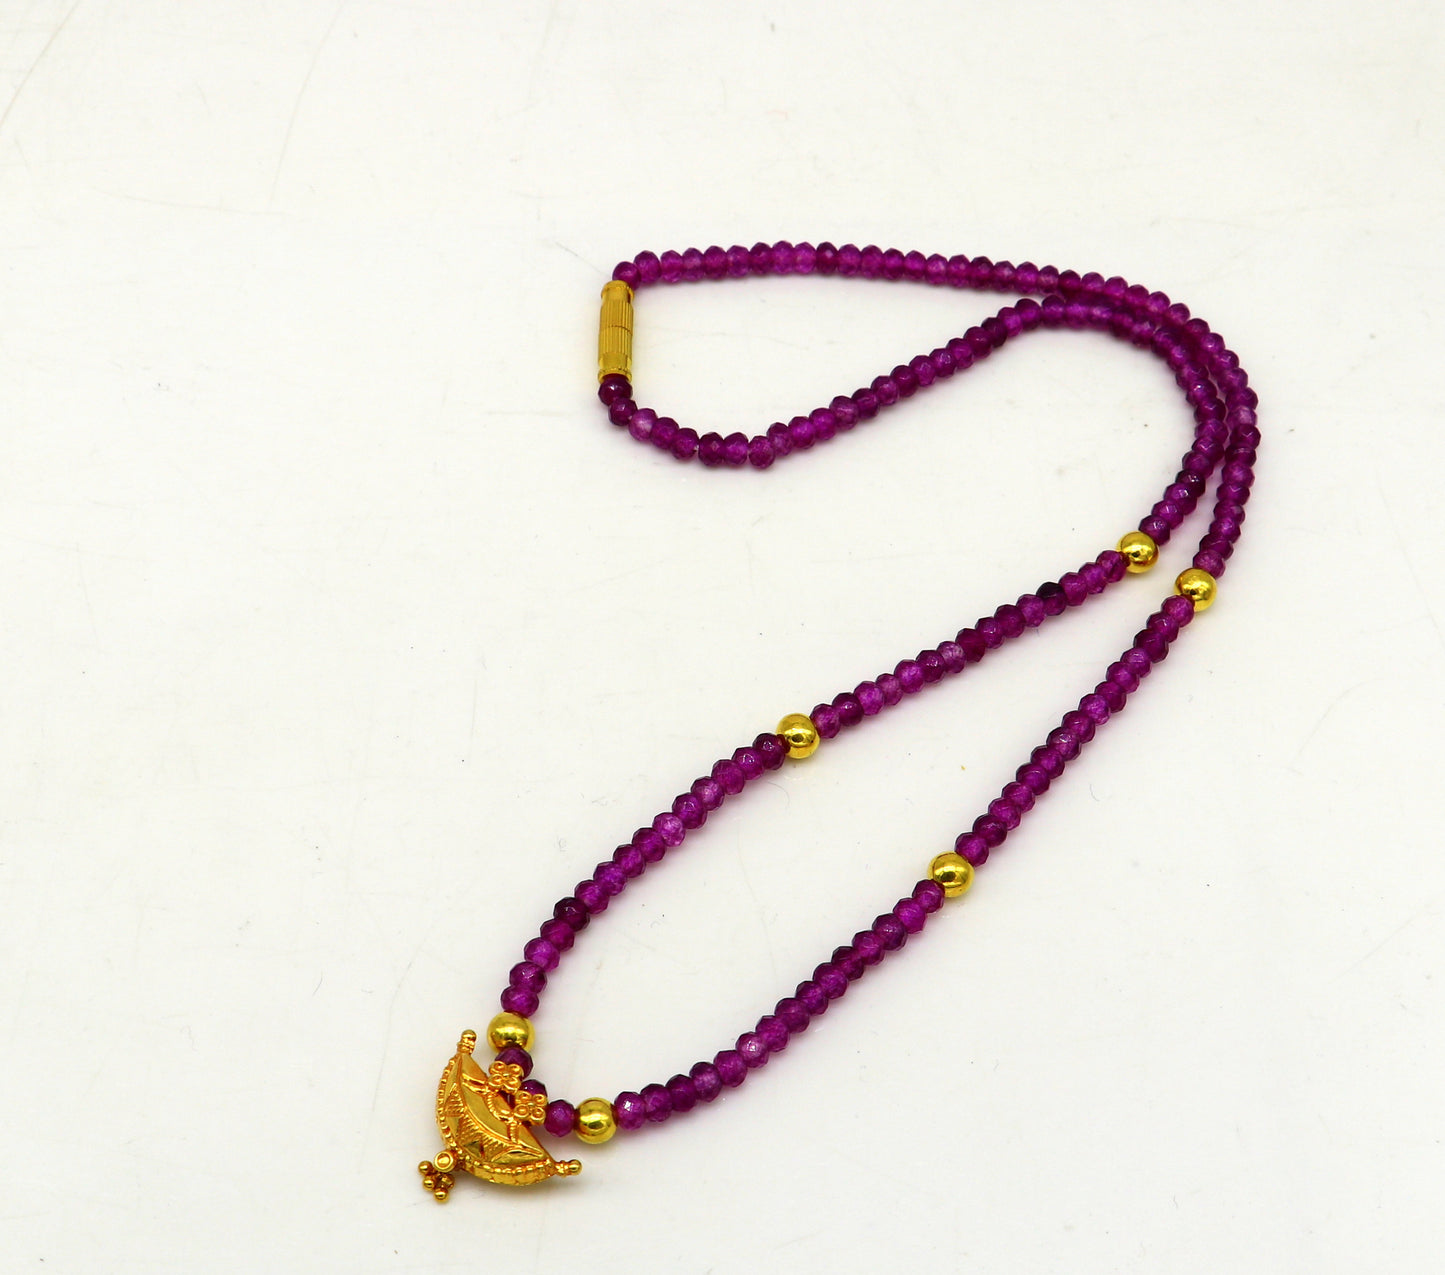 18" purple faceted beaded necklace, 20kt yellow gold amulet stylish pendant, excellent customized brides gift tribal ethnic jewelry ap06 - TRIBAL ORNAMENTS